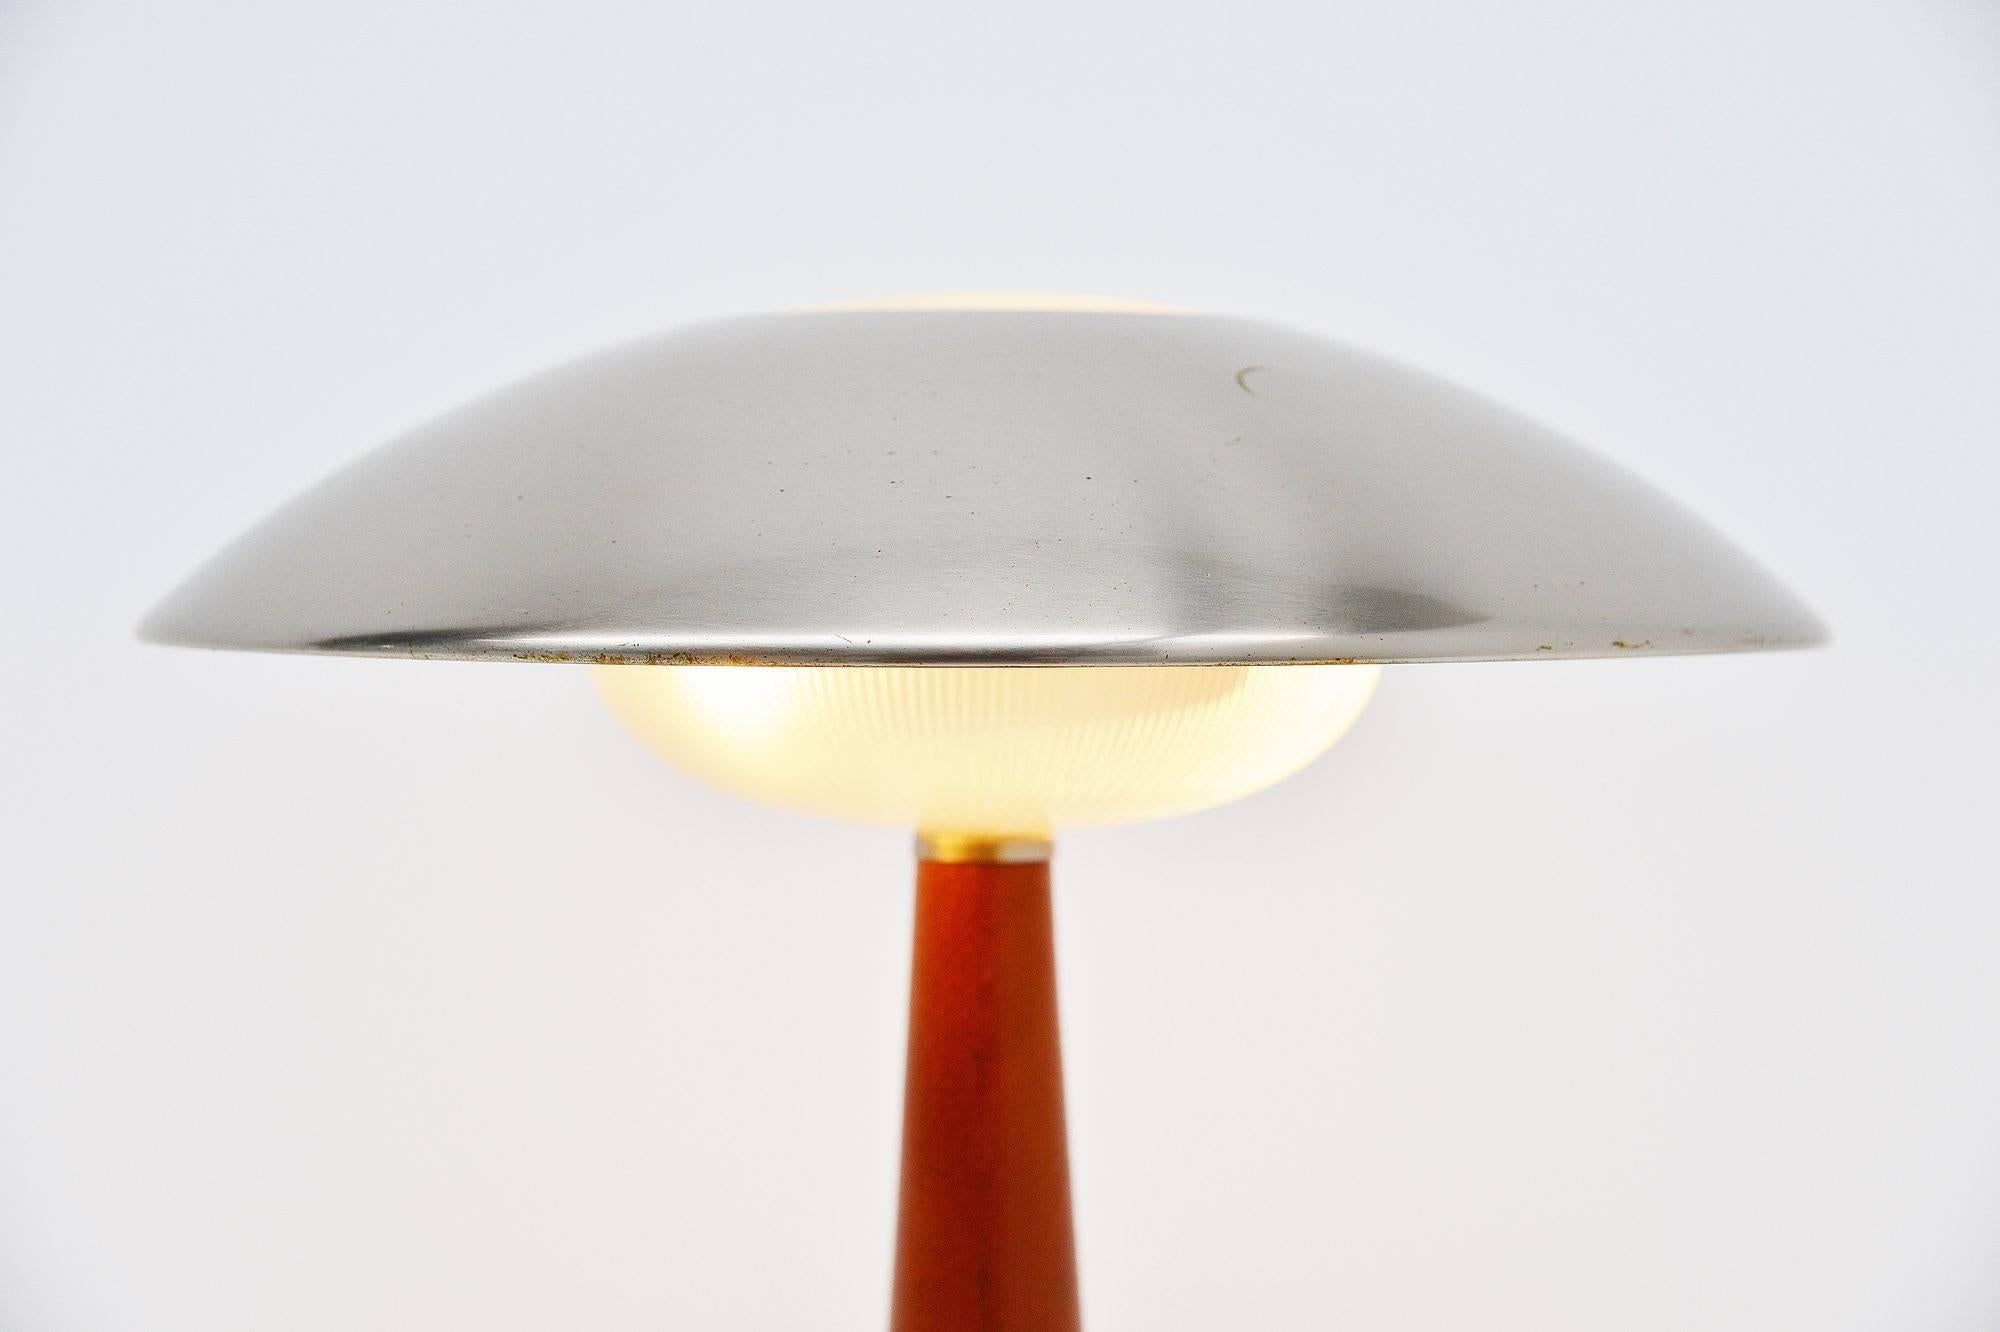 Very nice table lamp model 8041 designed and made by Stilnovo, Italy 1960. This is for a very nice modernist shaped table pendant lamp with a nickel plated shade, glass diffuser and cognac leather covered base. This is a very nice lamp designed in